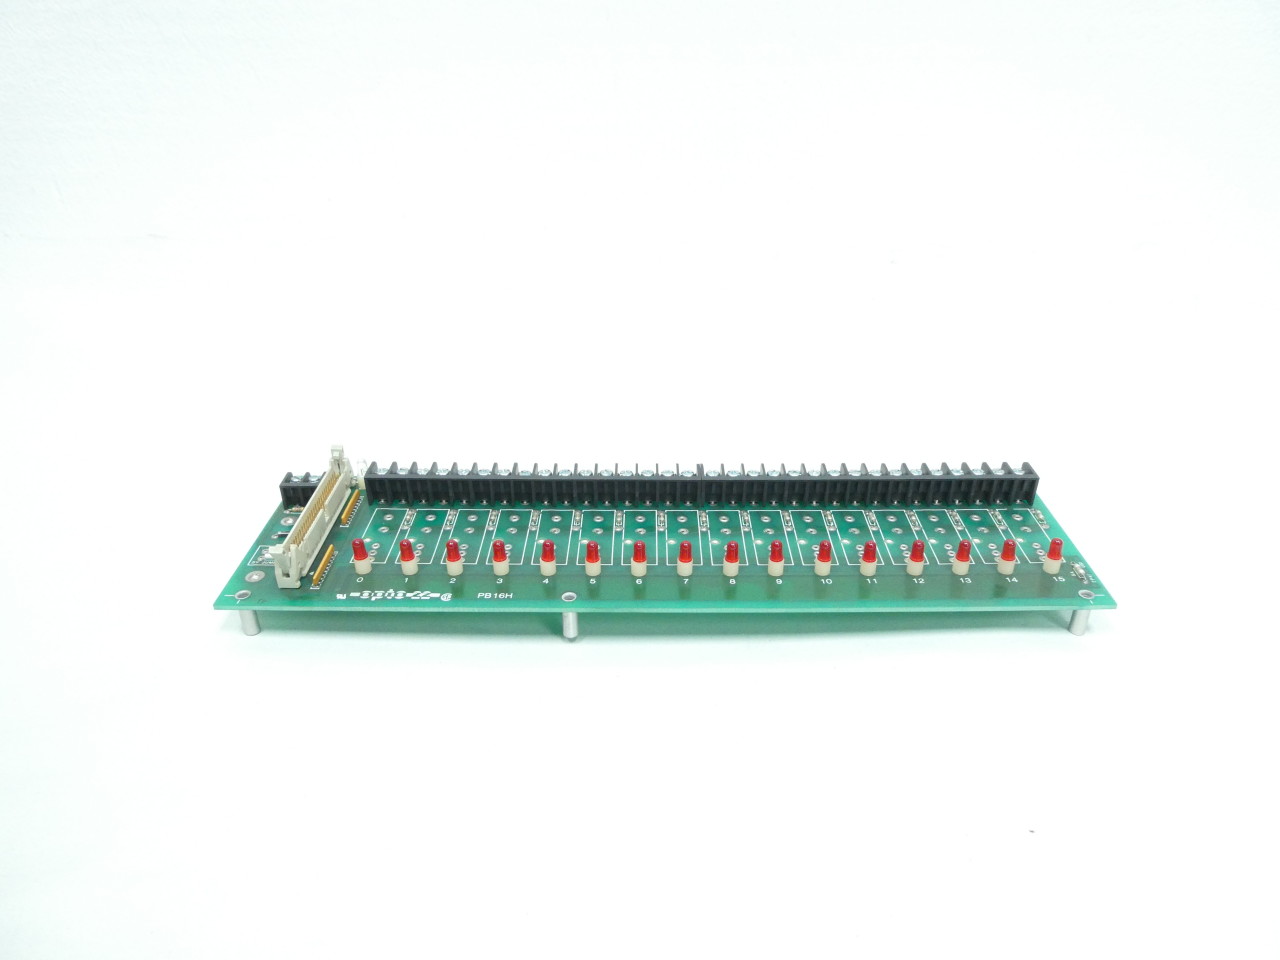 BOT ENGINEERING RM-SM-3000012-03 STACK FLOW SENSOR OVERRIDE CONTROL PCB  CIRCUIT BOARD